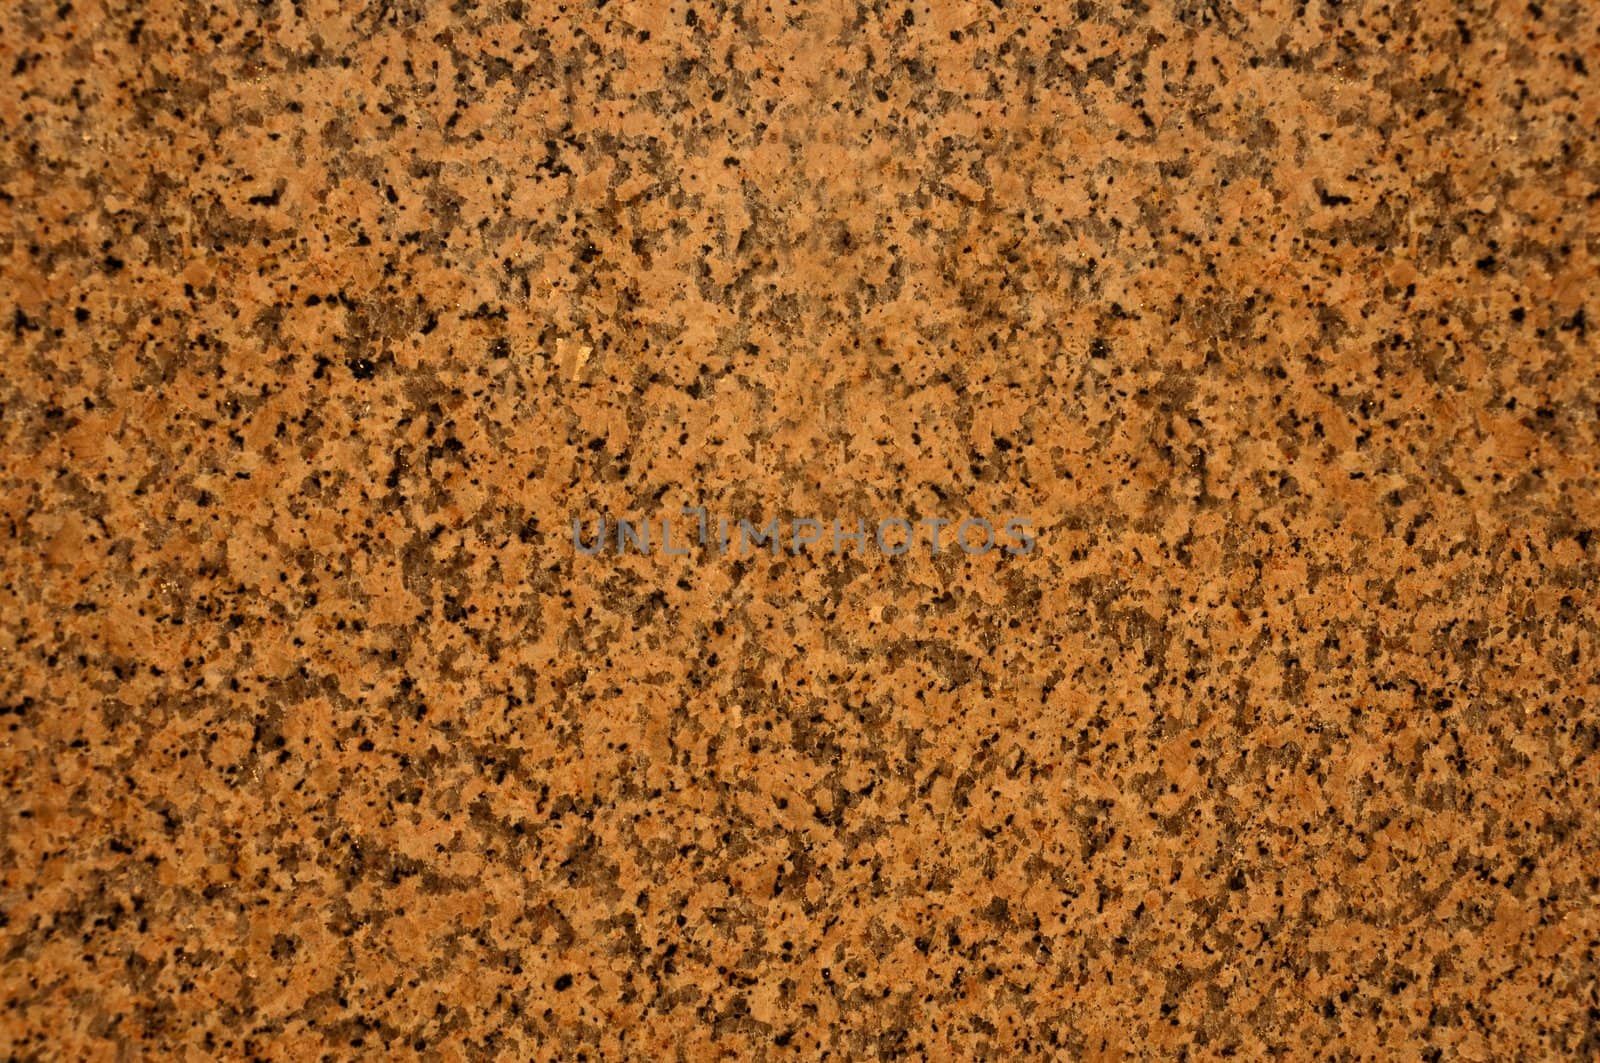 Abstract background/texture - Yellow granite crumb.